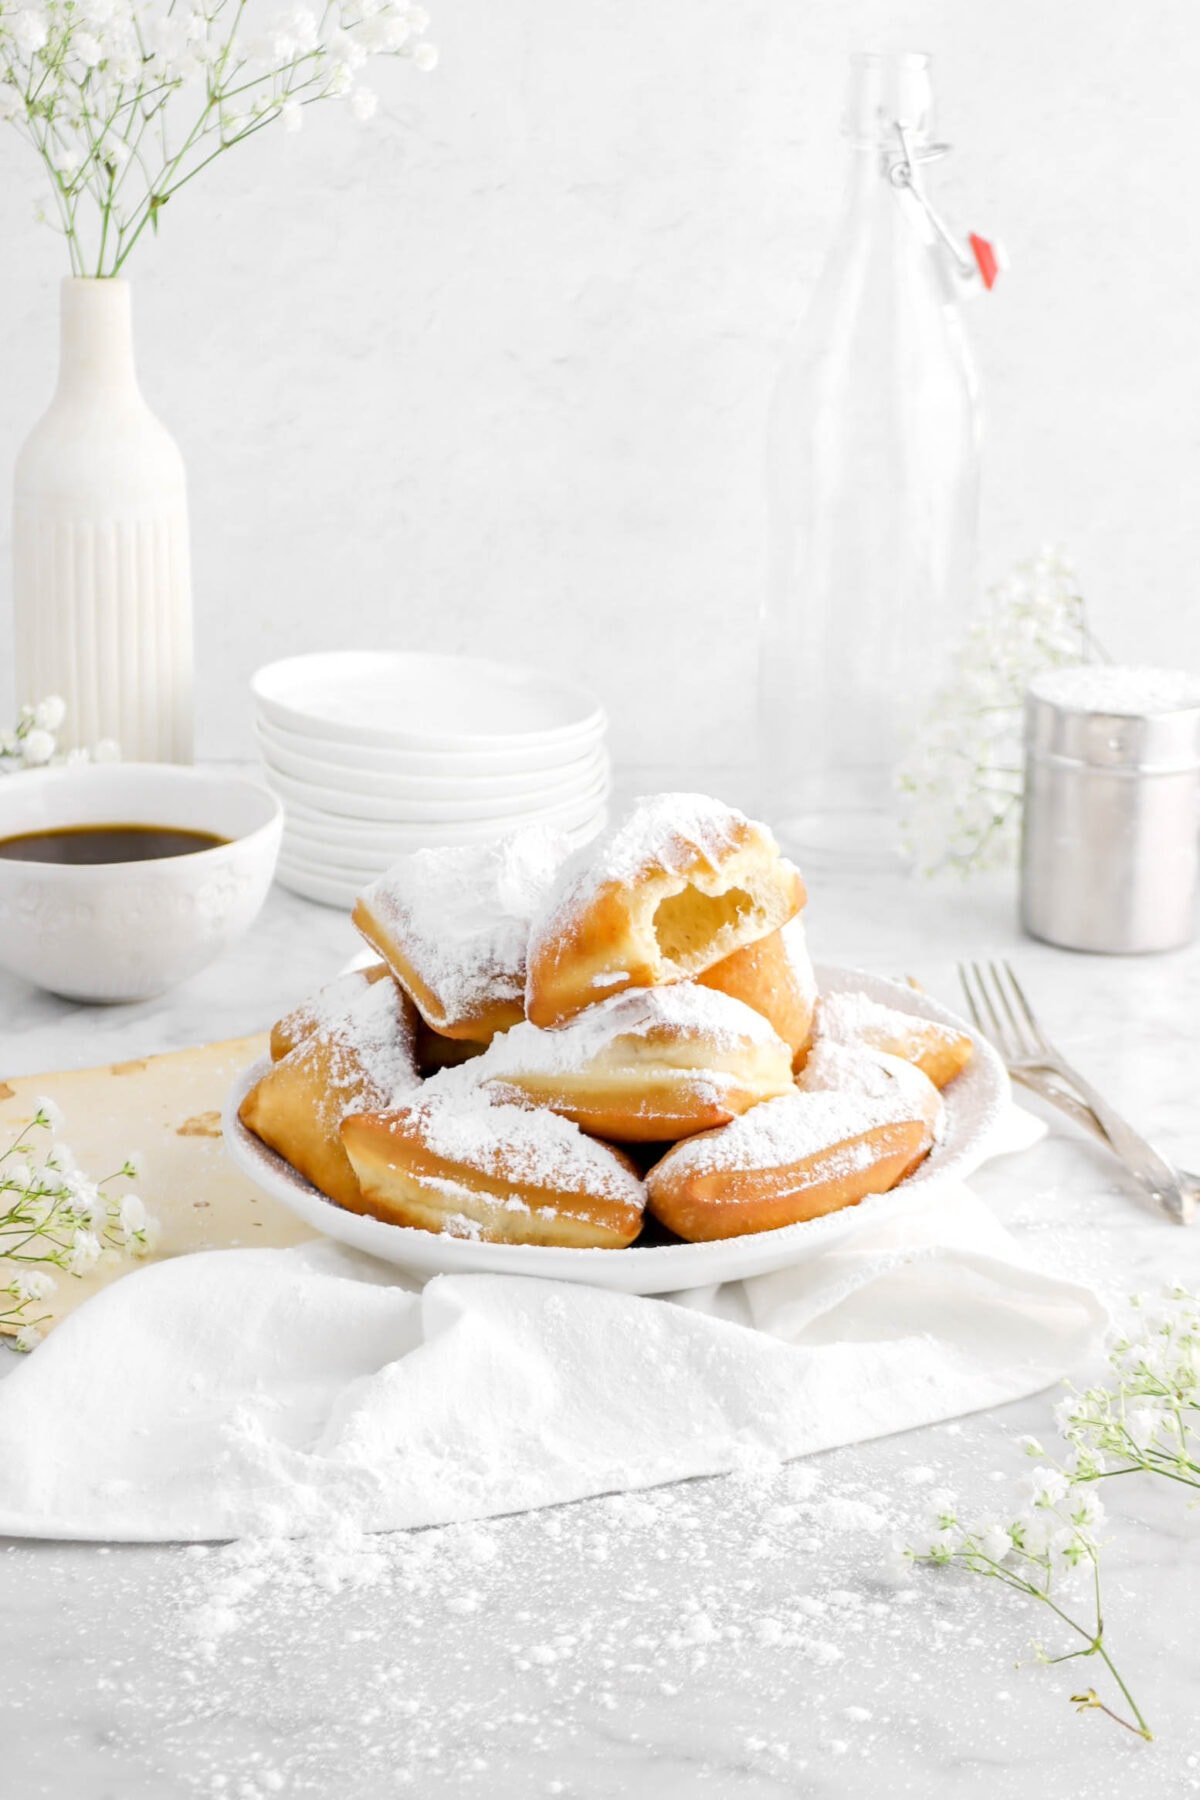 angled photo of beignets in white bowl with bite missing from top beignet on white napkin with old book pages, two forks, and stack of white plates behind